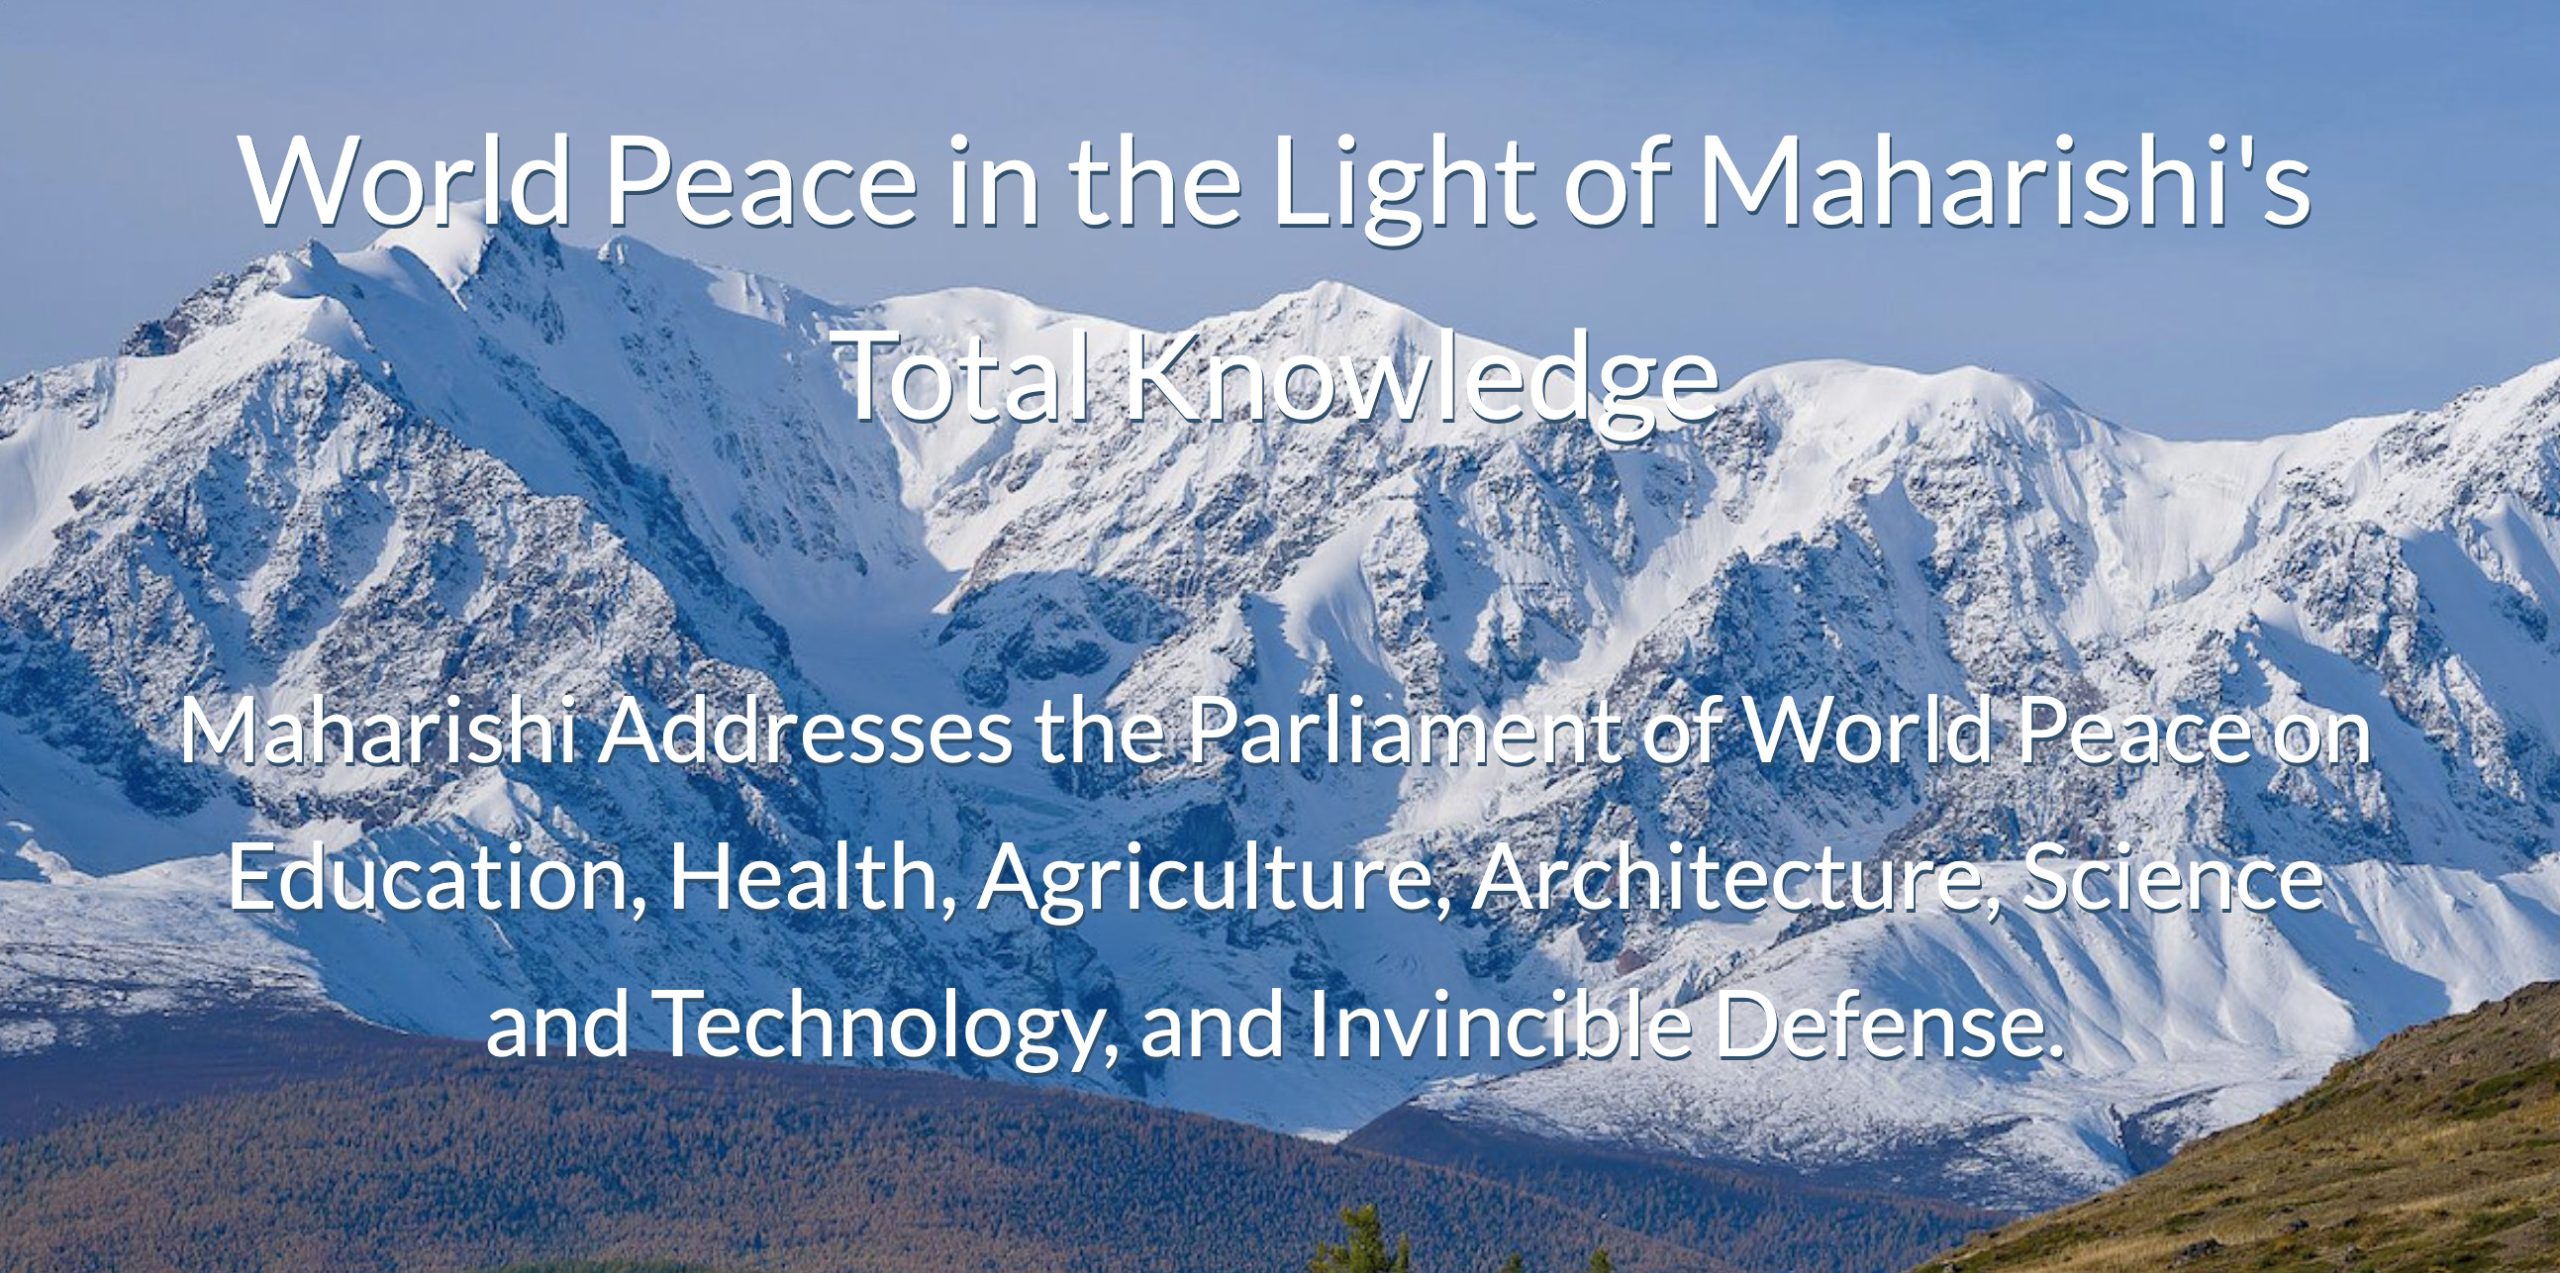 World Peace in the Light of Maharishi's Total Knowledge * Maharishi Addresses the Parliament of World Peace on Education, Health, Agriculture, Architecture, Science and Technology, and Invincible Defense